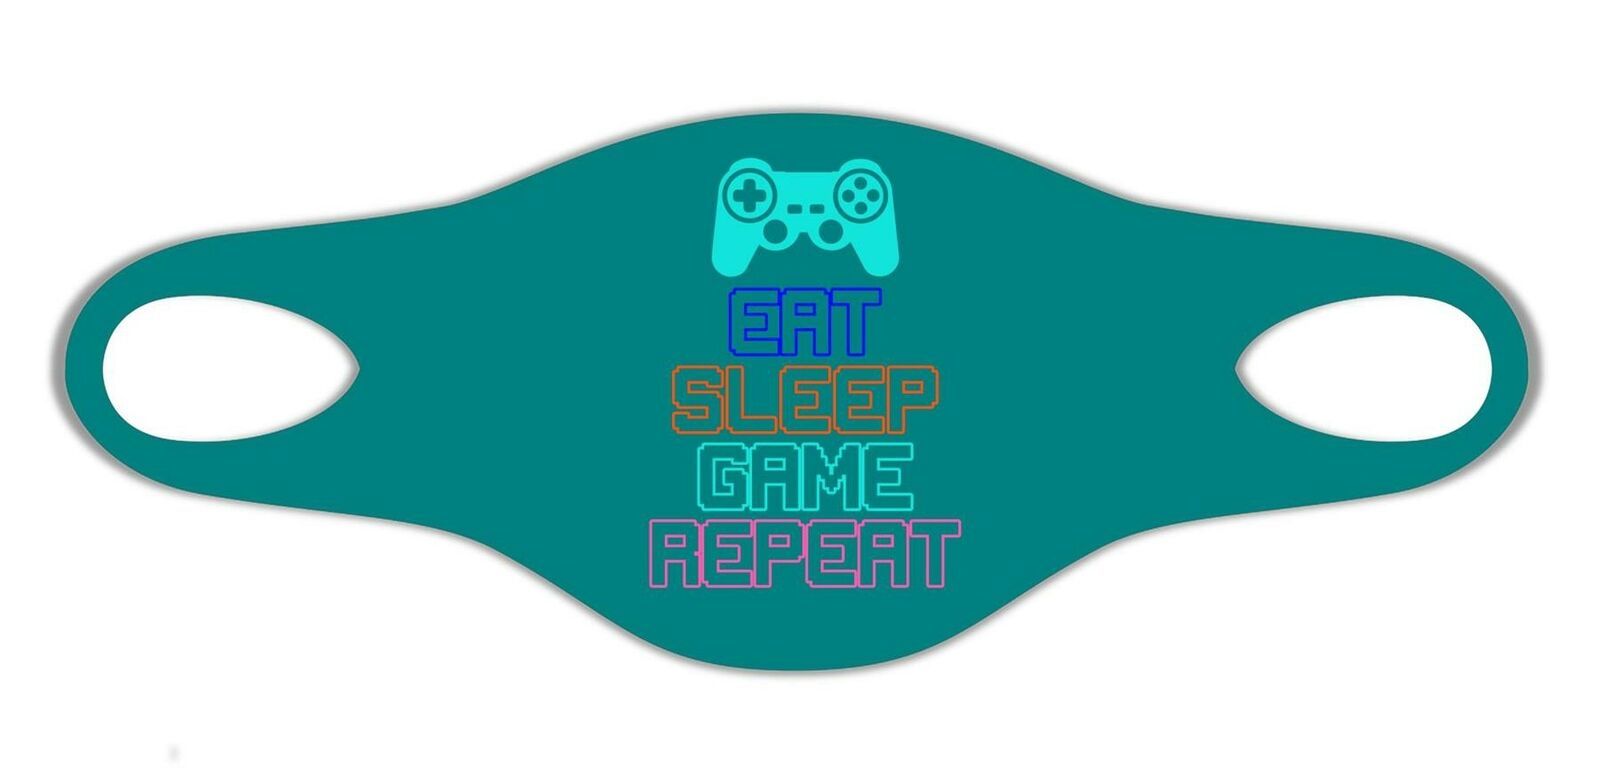 Eat Sleep Game Repeat Funny Humor Protective Wash soft Face Mask